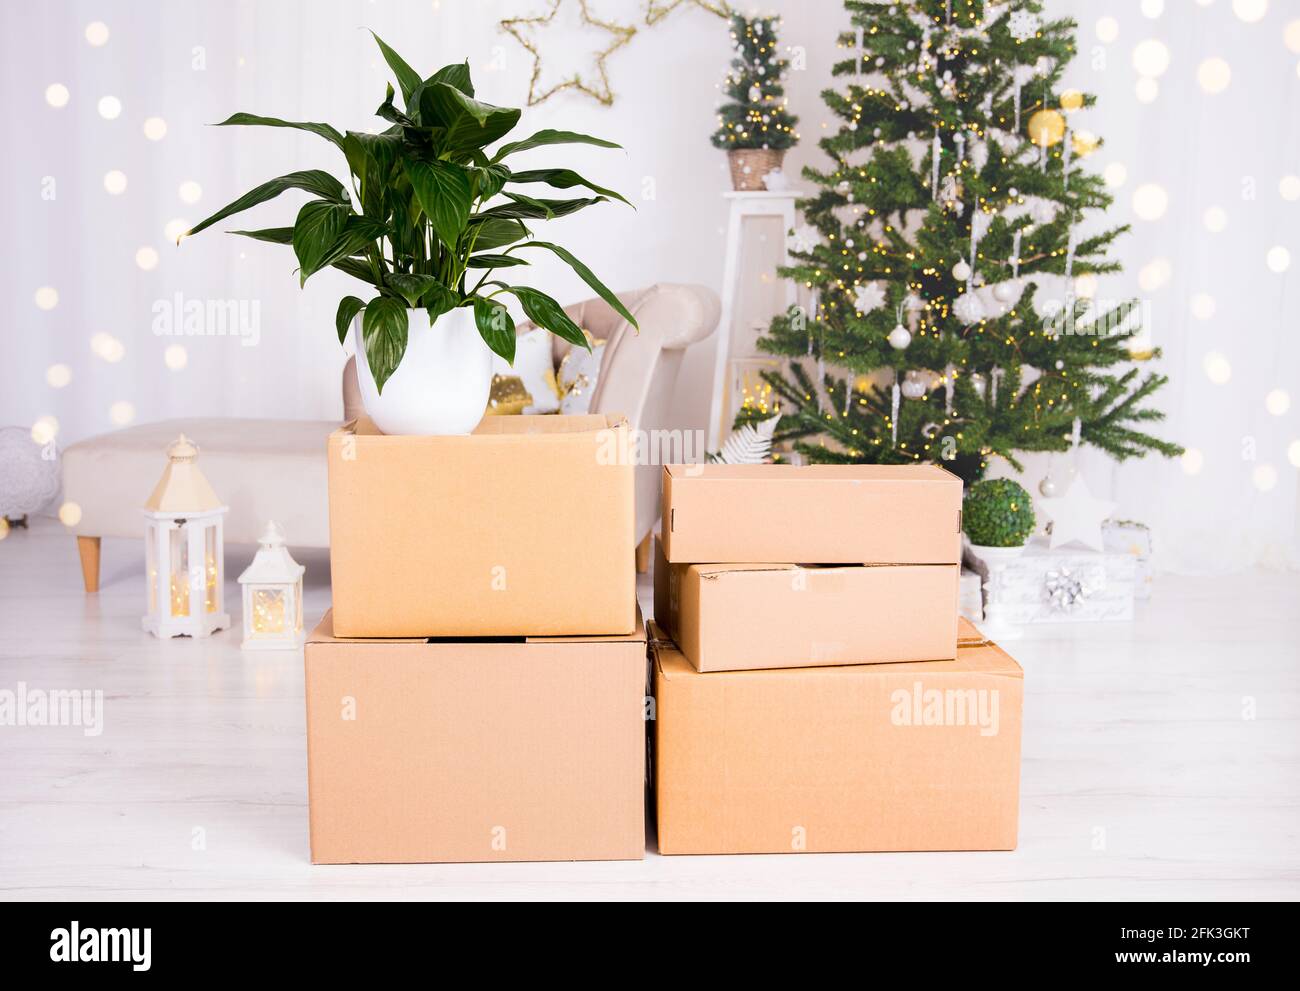 Moving in to new home for Christmas concept. Focus on cardboard relocation boxes and decorated Christmas tree with presents under it on the background Stock Photo